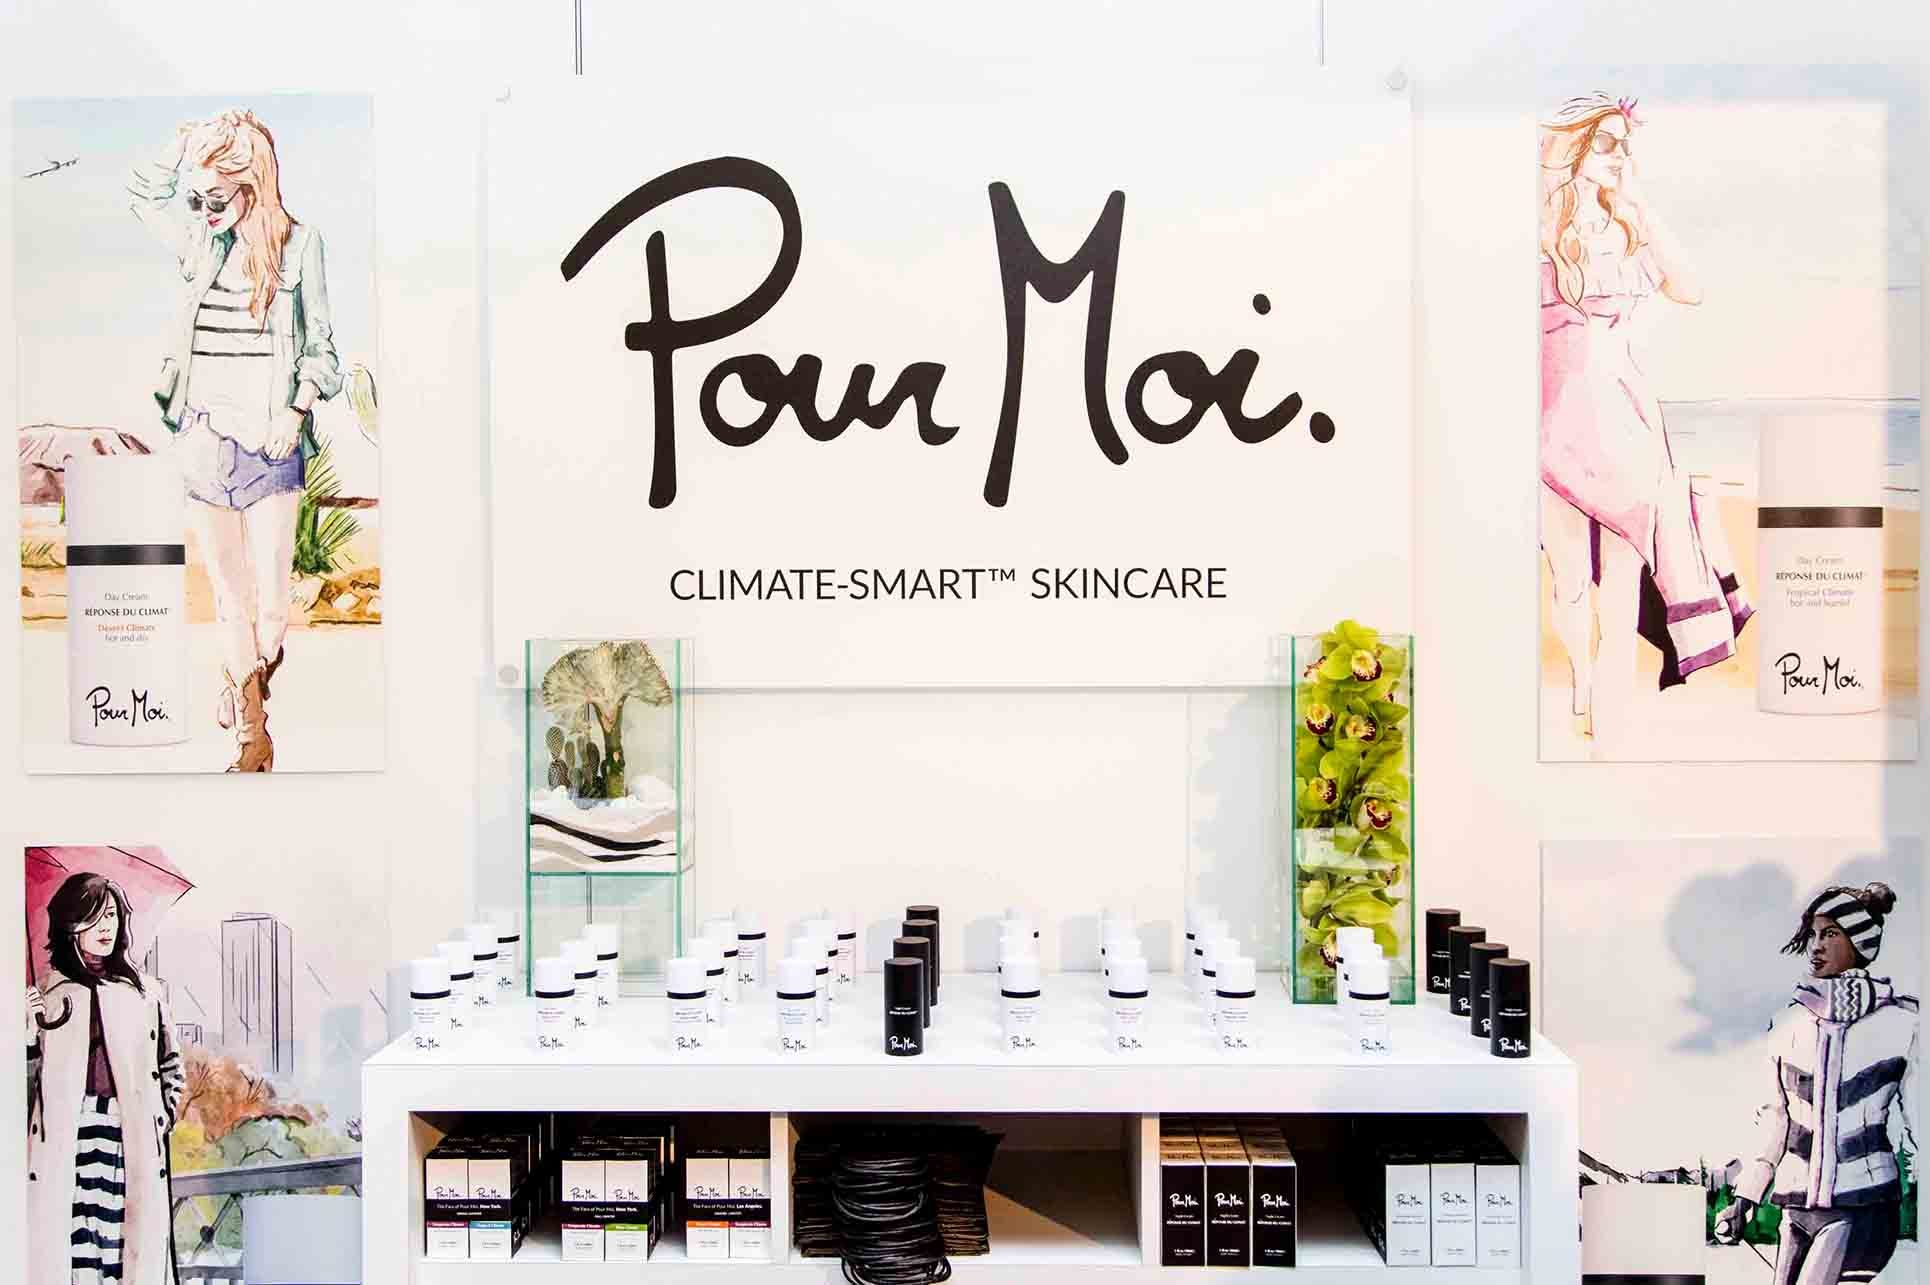 Pour Moi Officially Launched at Indie Beauty Expo!